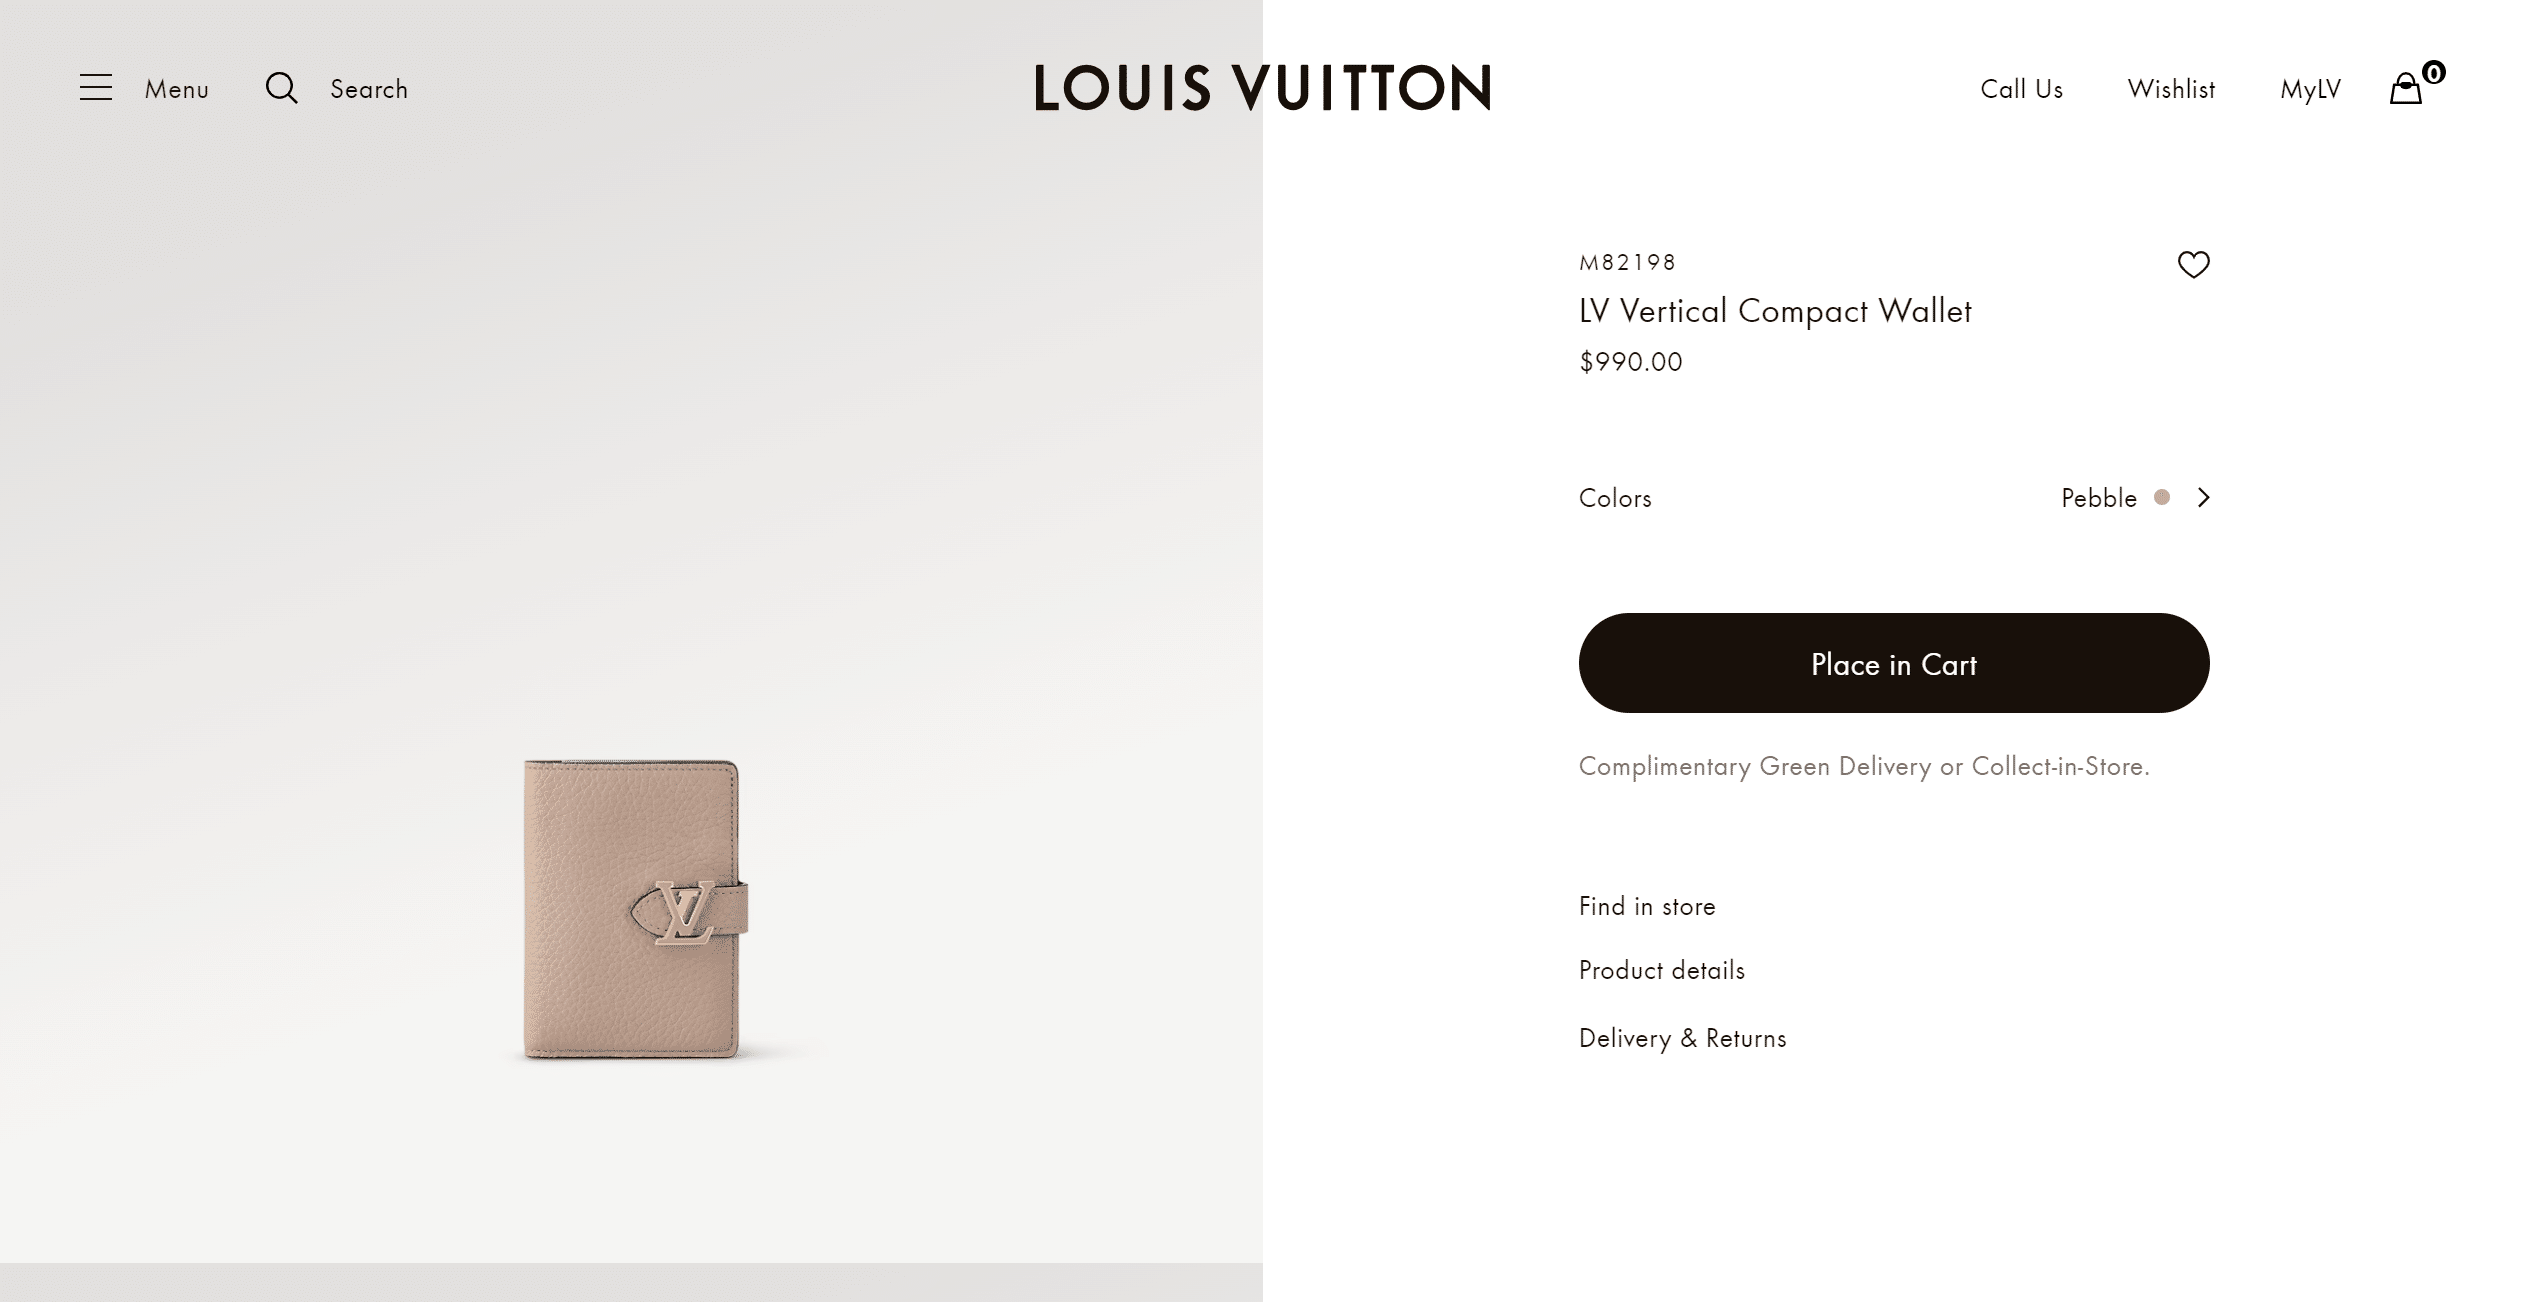 LV-Vertical-Compact-Wallet-Capucines-Women-Small-Leather-Goods-LOUIS-VUITTON--1.png